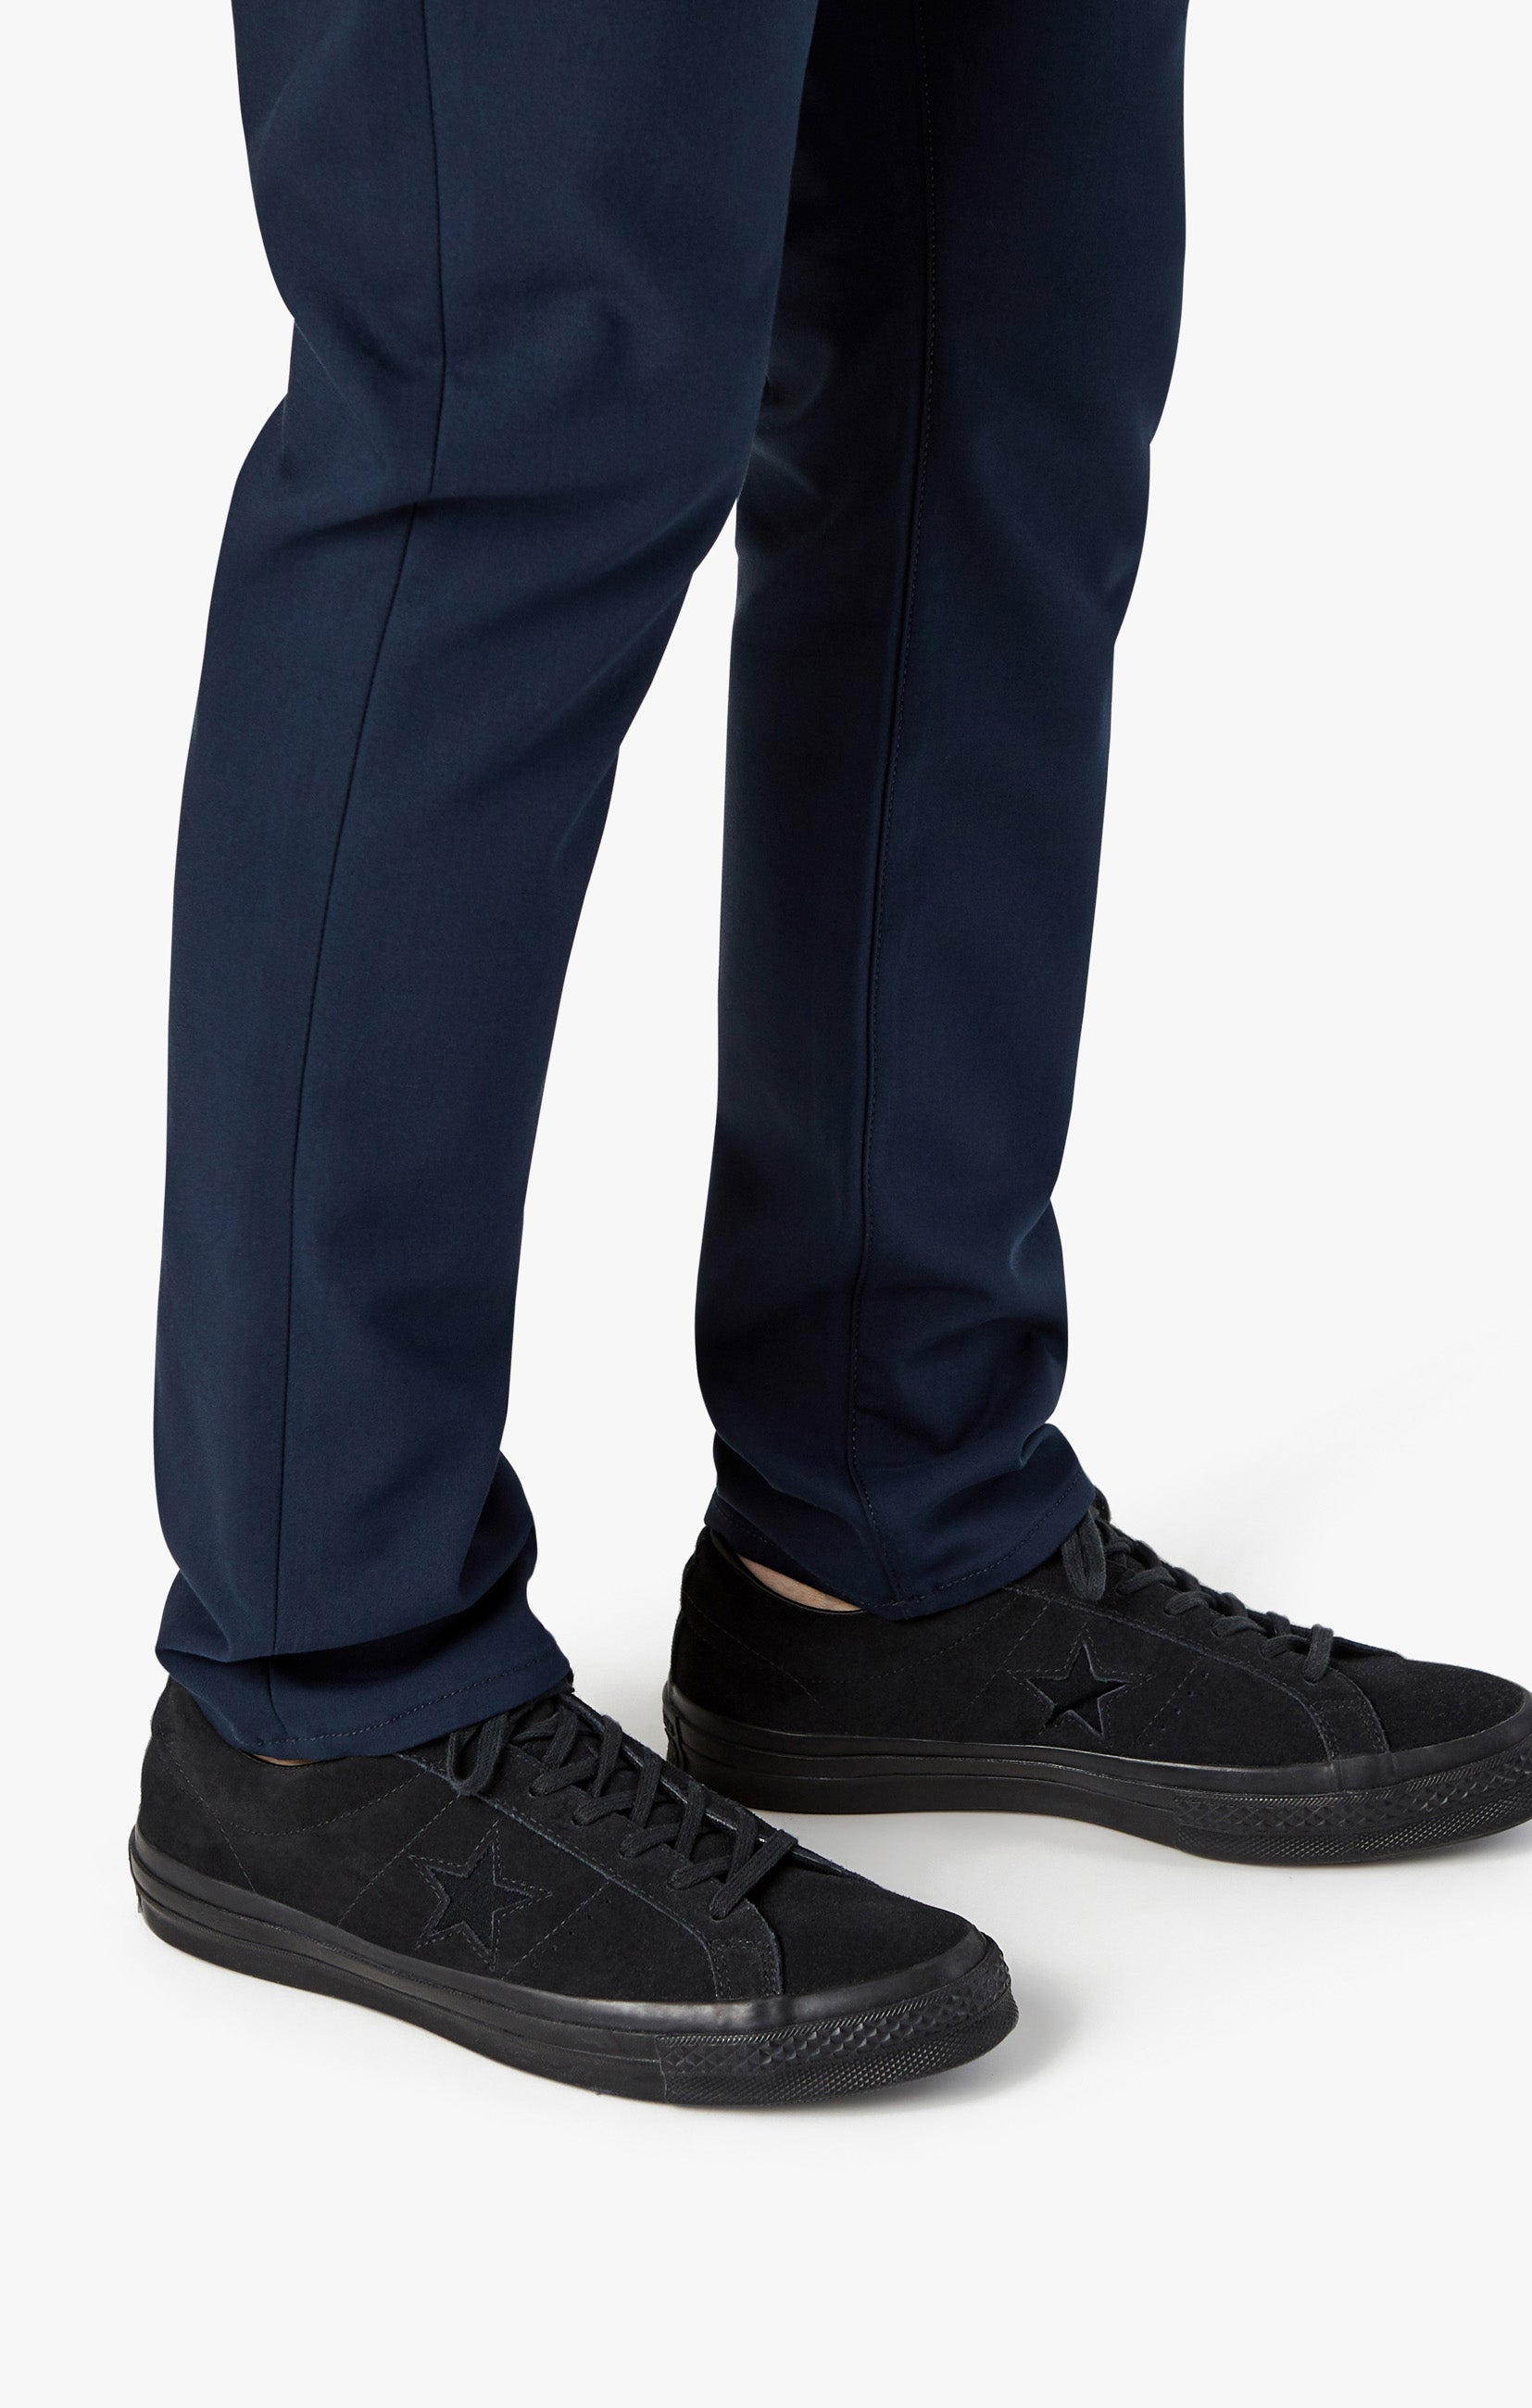 Courage Straight Leg Pants in Navy Commuter Image 7